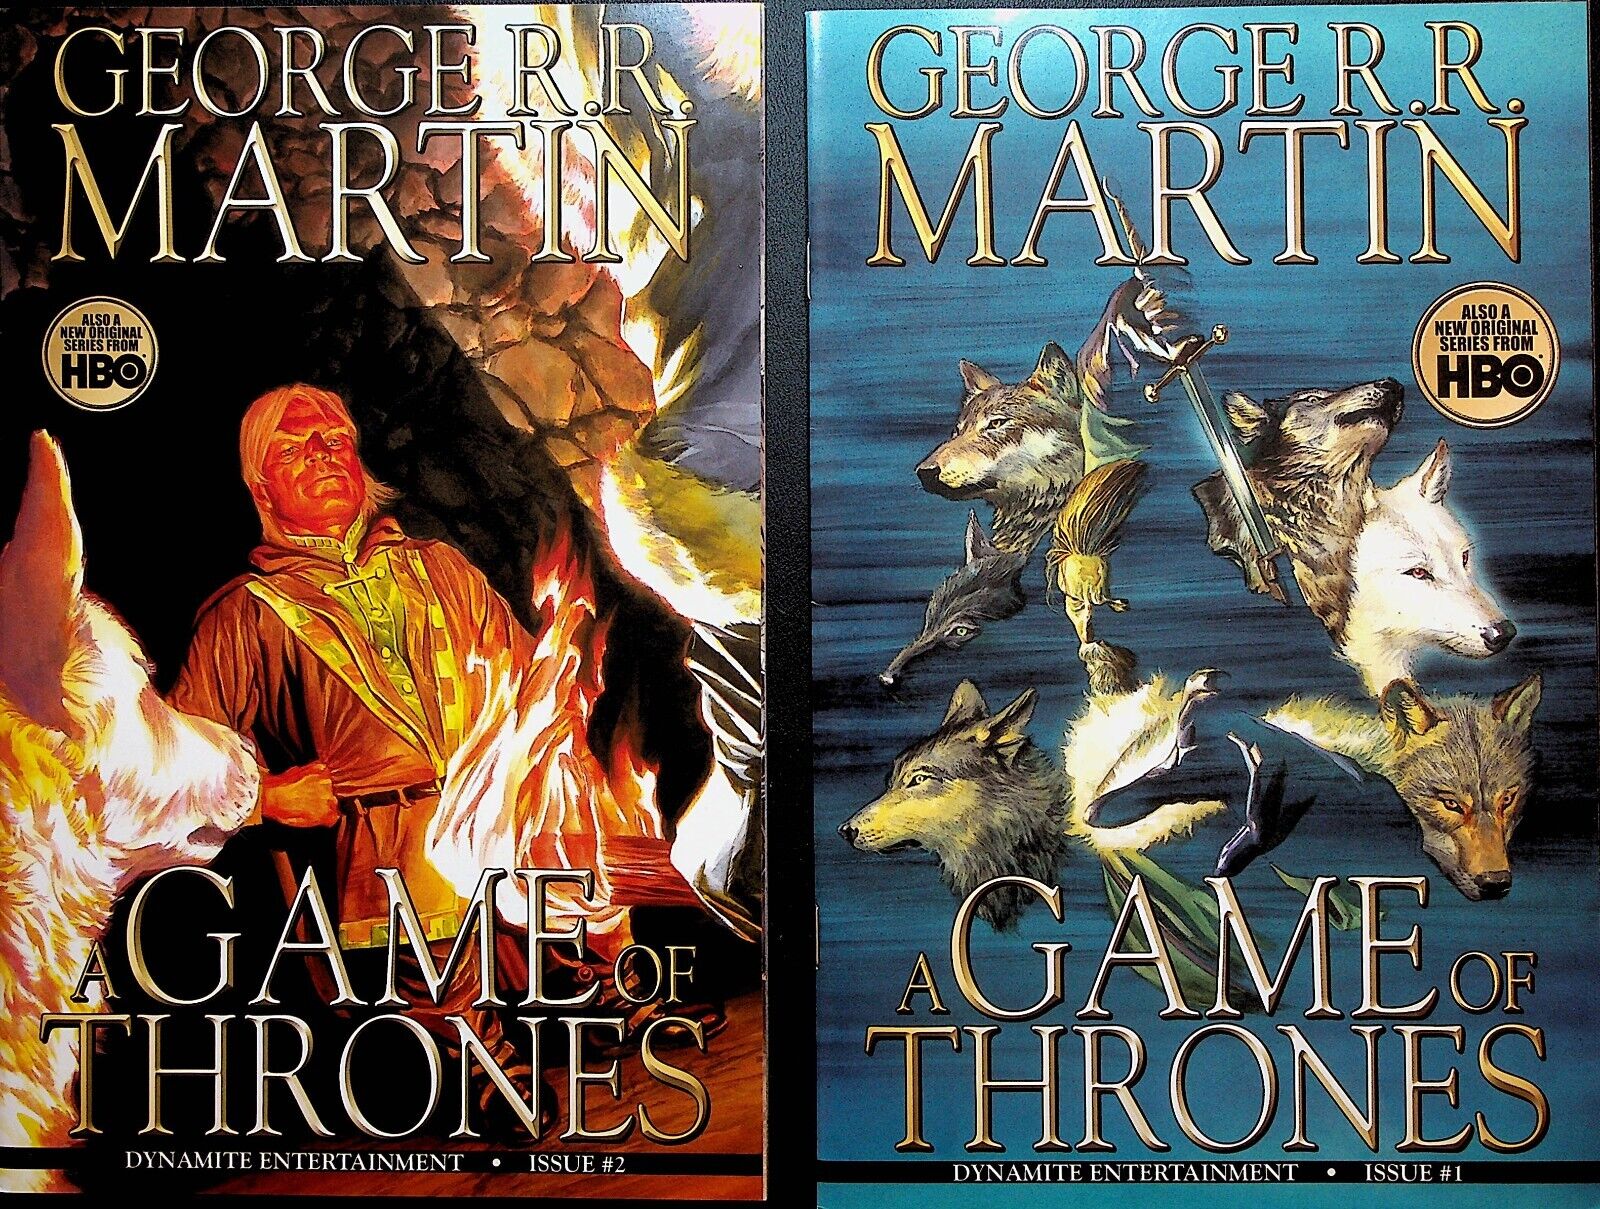 A Game of Thrones 1 and 2 Set Dynamite Entertainment 2011 George RR Martin